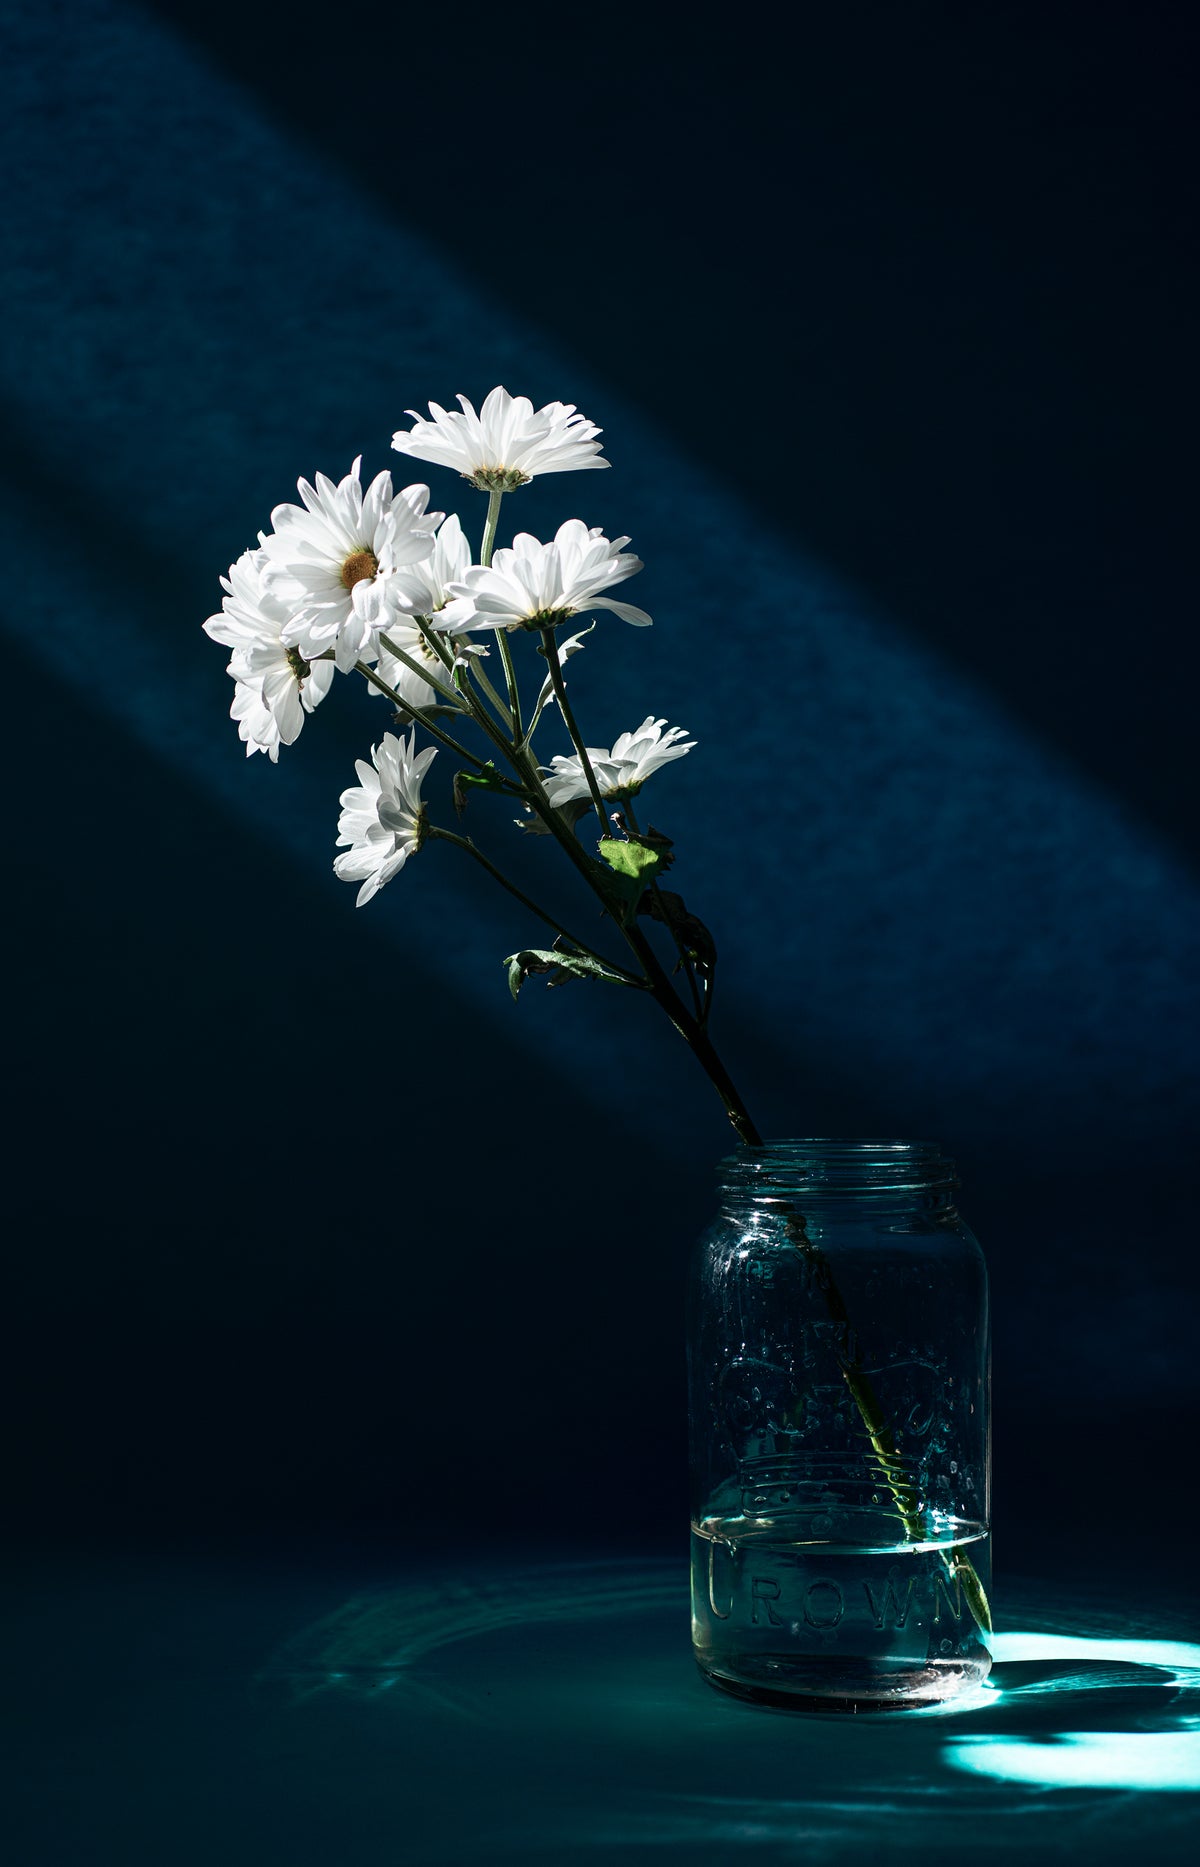 a bunch of white daisy in a glass jar against a blue background